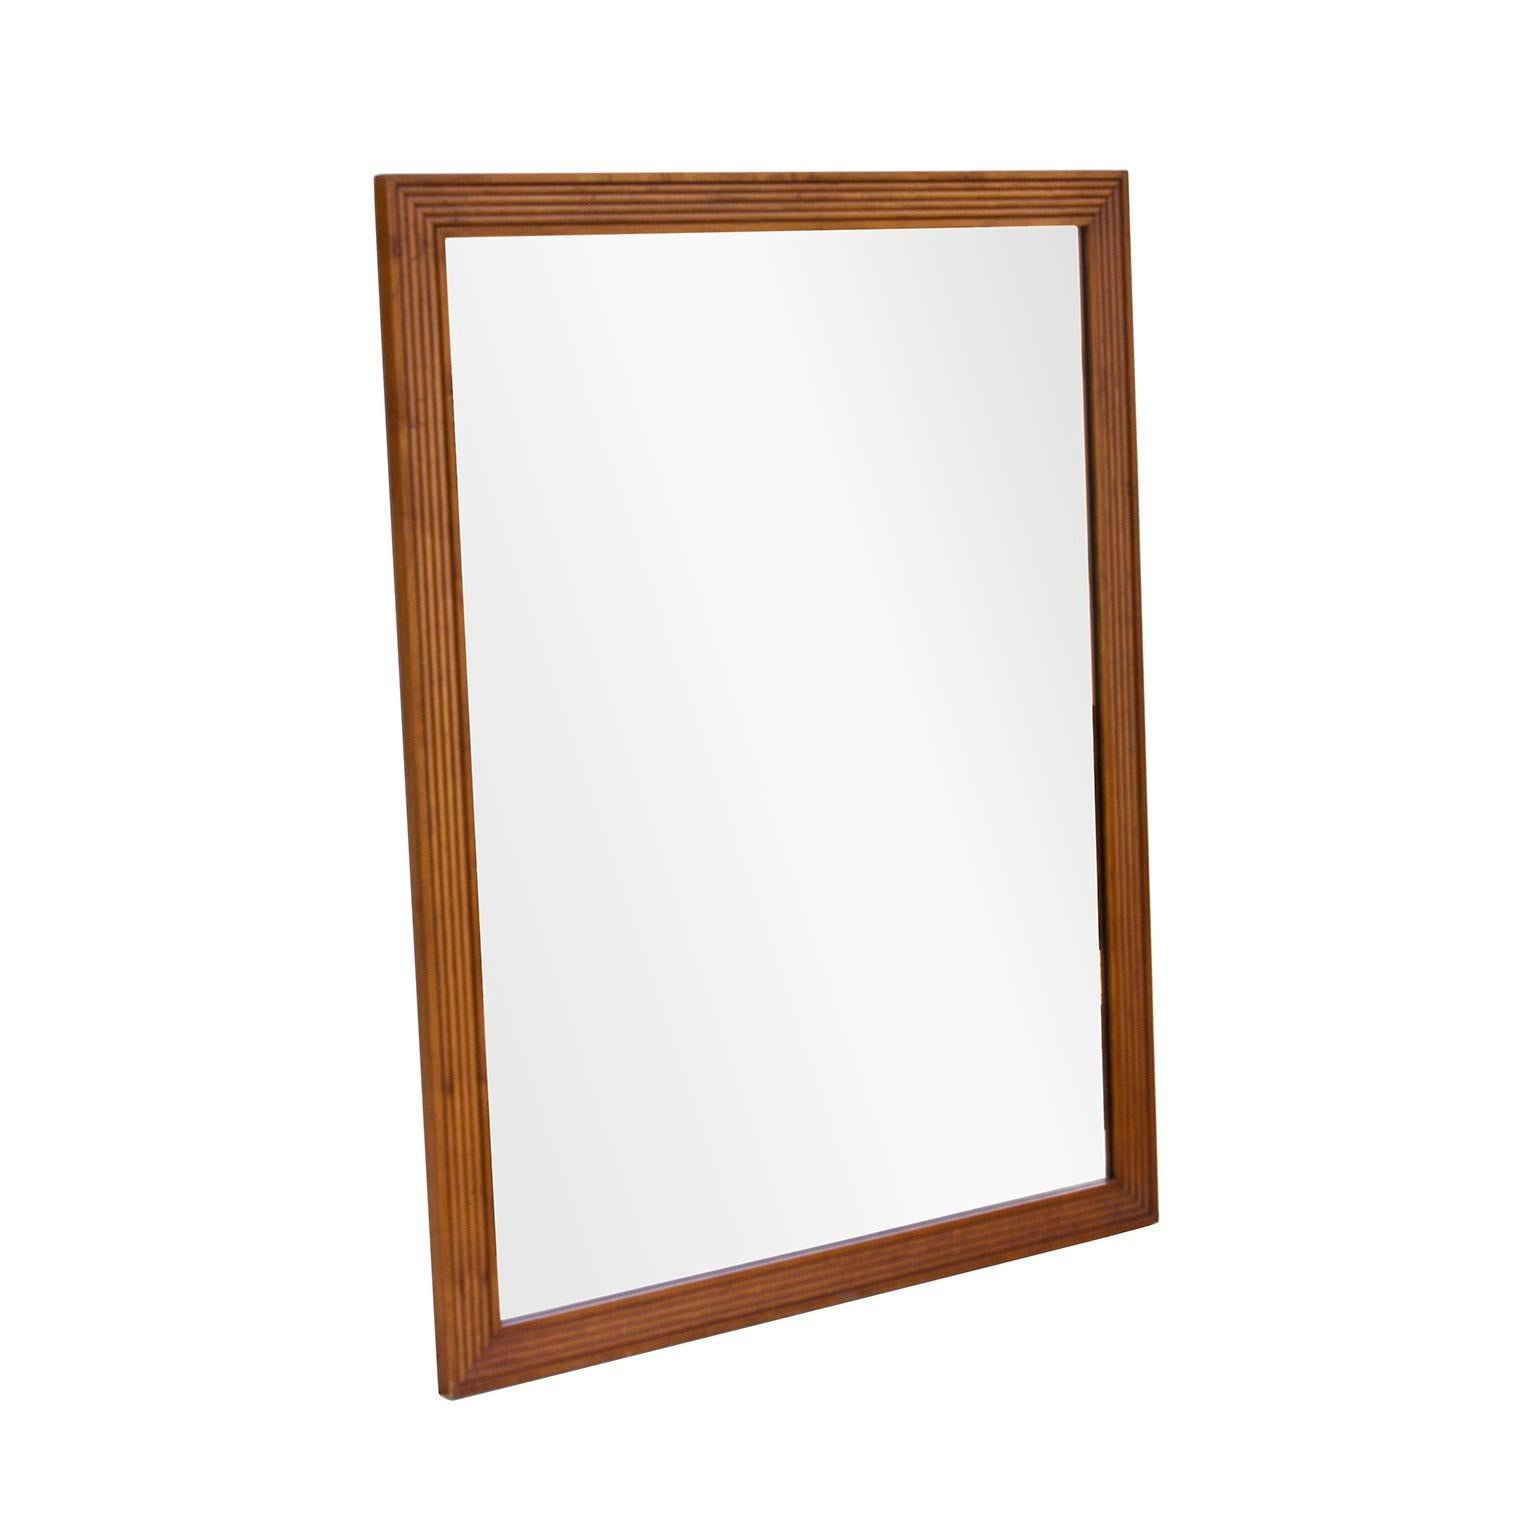 Campaign Baker Furniture Milling Road Stepped or Beveled Walnut Mirror For Sale